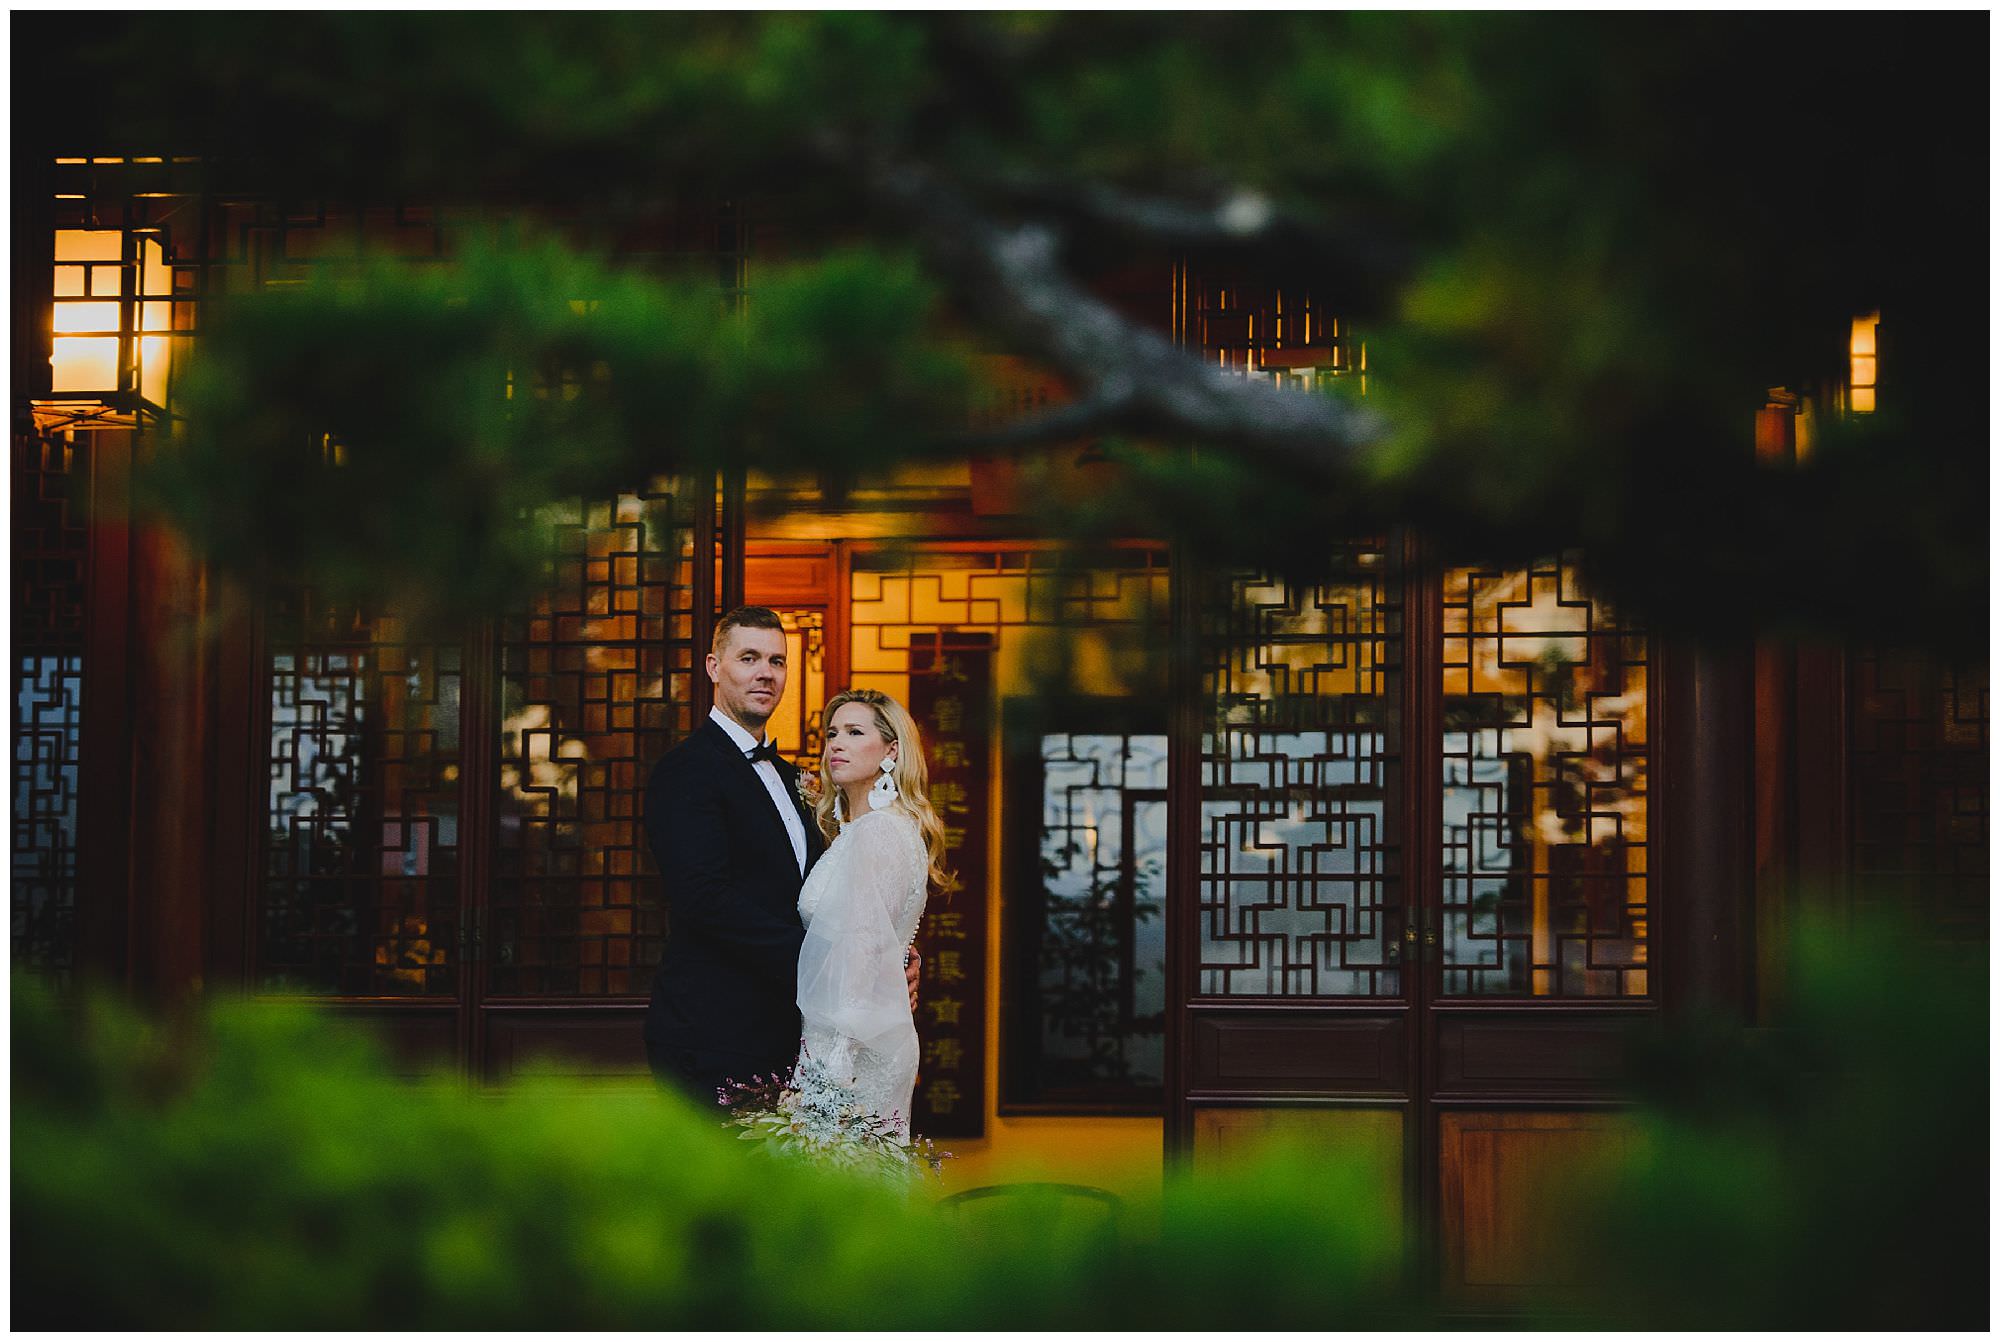 stylish bride and groom at sunset after their wedding ceremony at Dr. Sun Yat-Sen Classical Chinese Gardens, elopement, intimate wedding, candid wedding photography